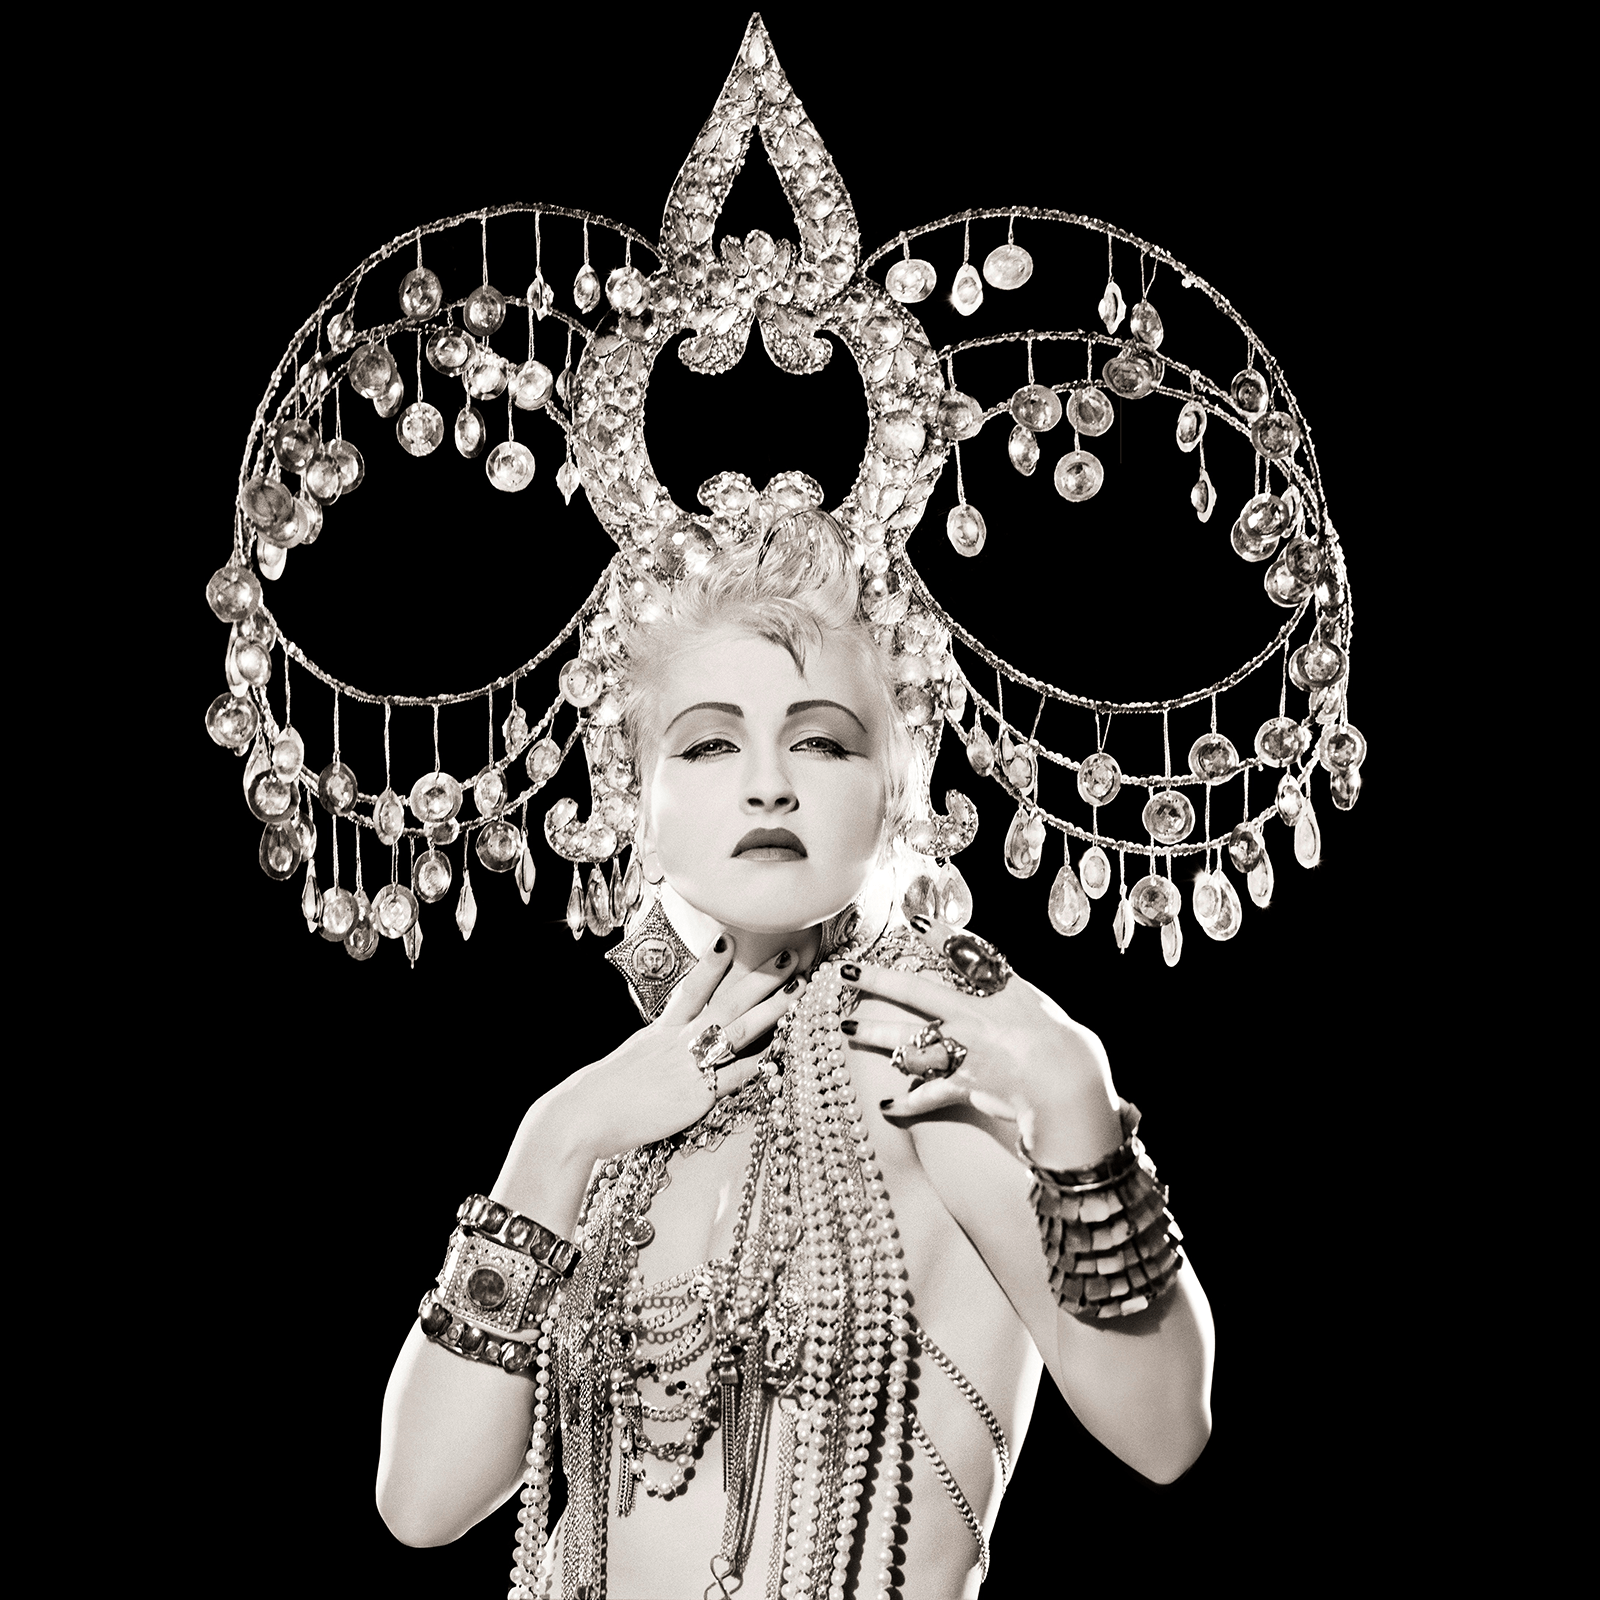 Matthew Rolston, Cyndi Lauper, Headdress, Los Angeles, 1986, from the series "Hollywood Royale" (Courtesy Fahey/Klein, Los Angeles).